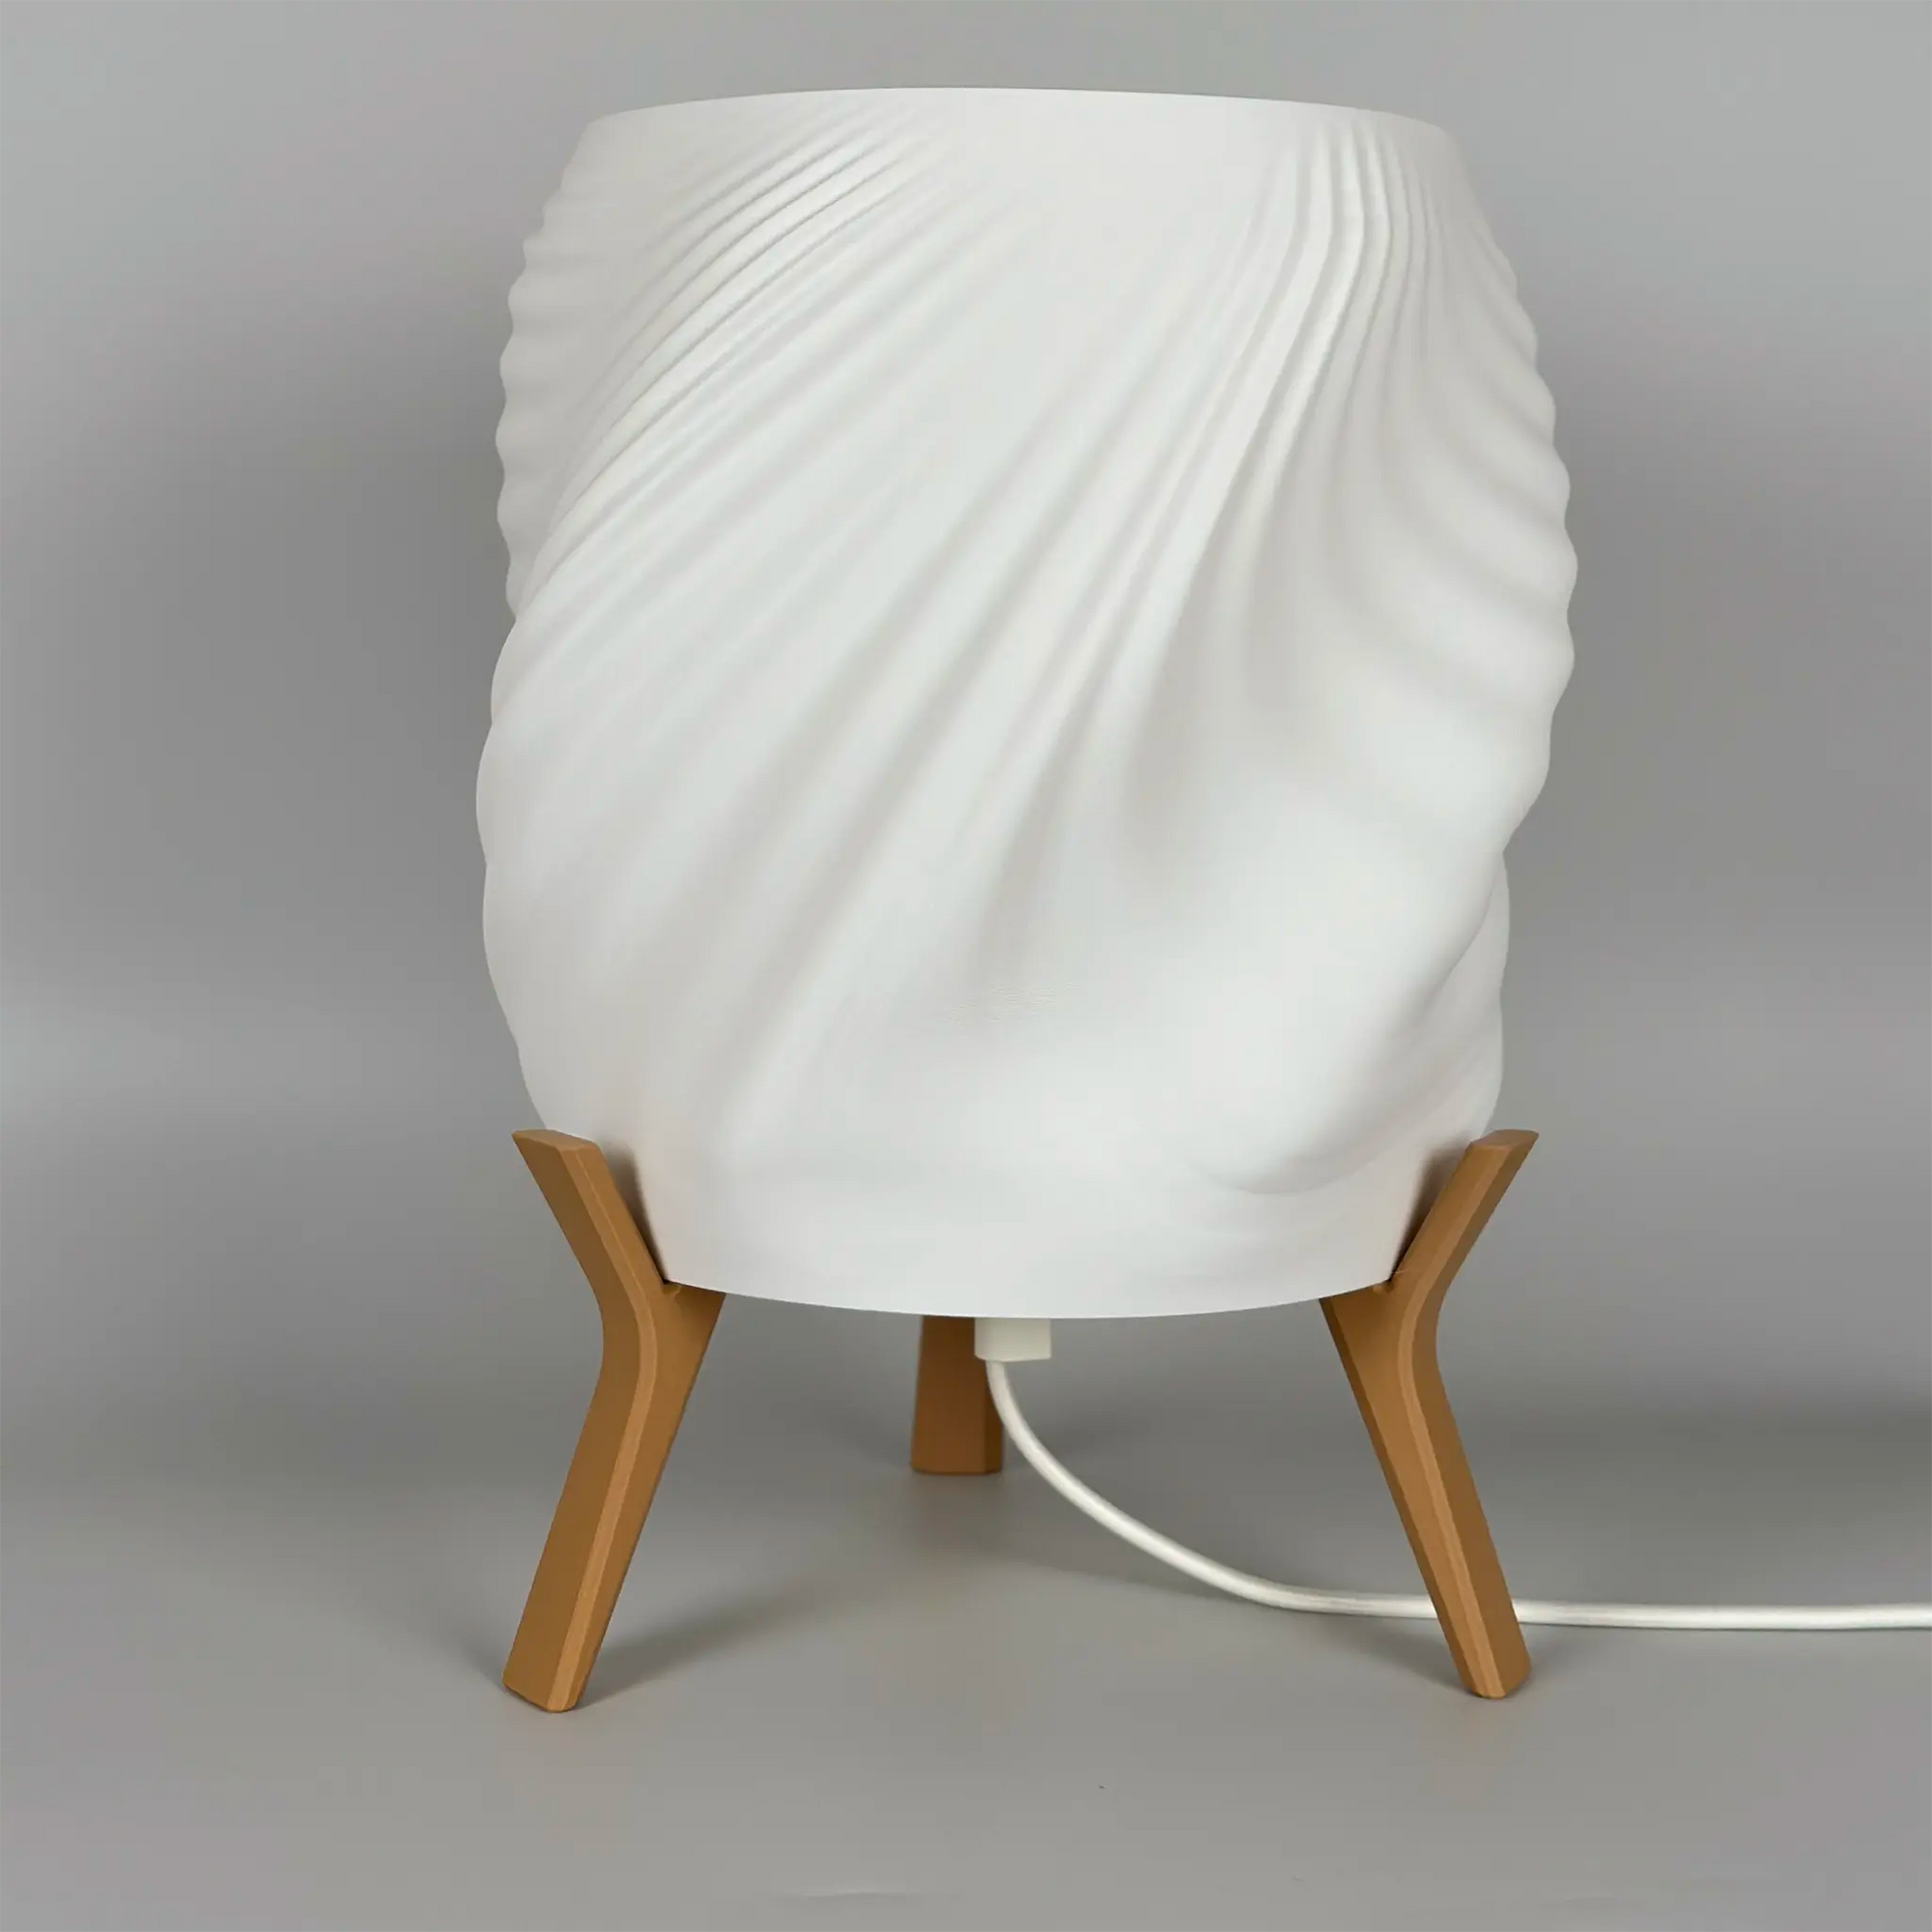 EleganceSweep Minimalist Table Lamp - Bedside Lamp in cotton white shade and wood brown base.